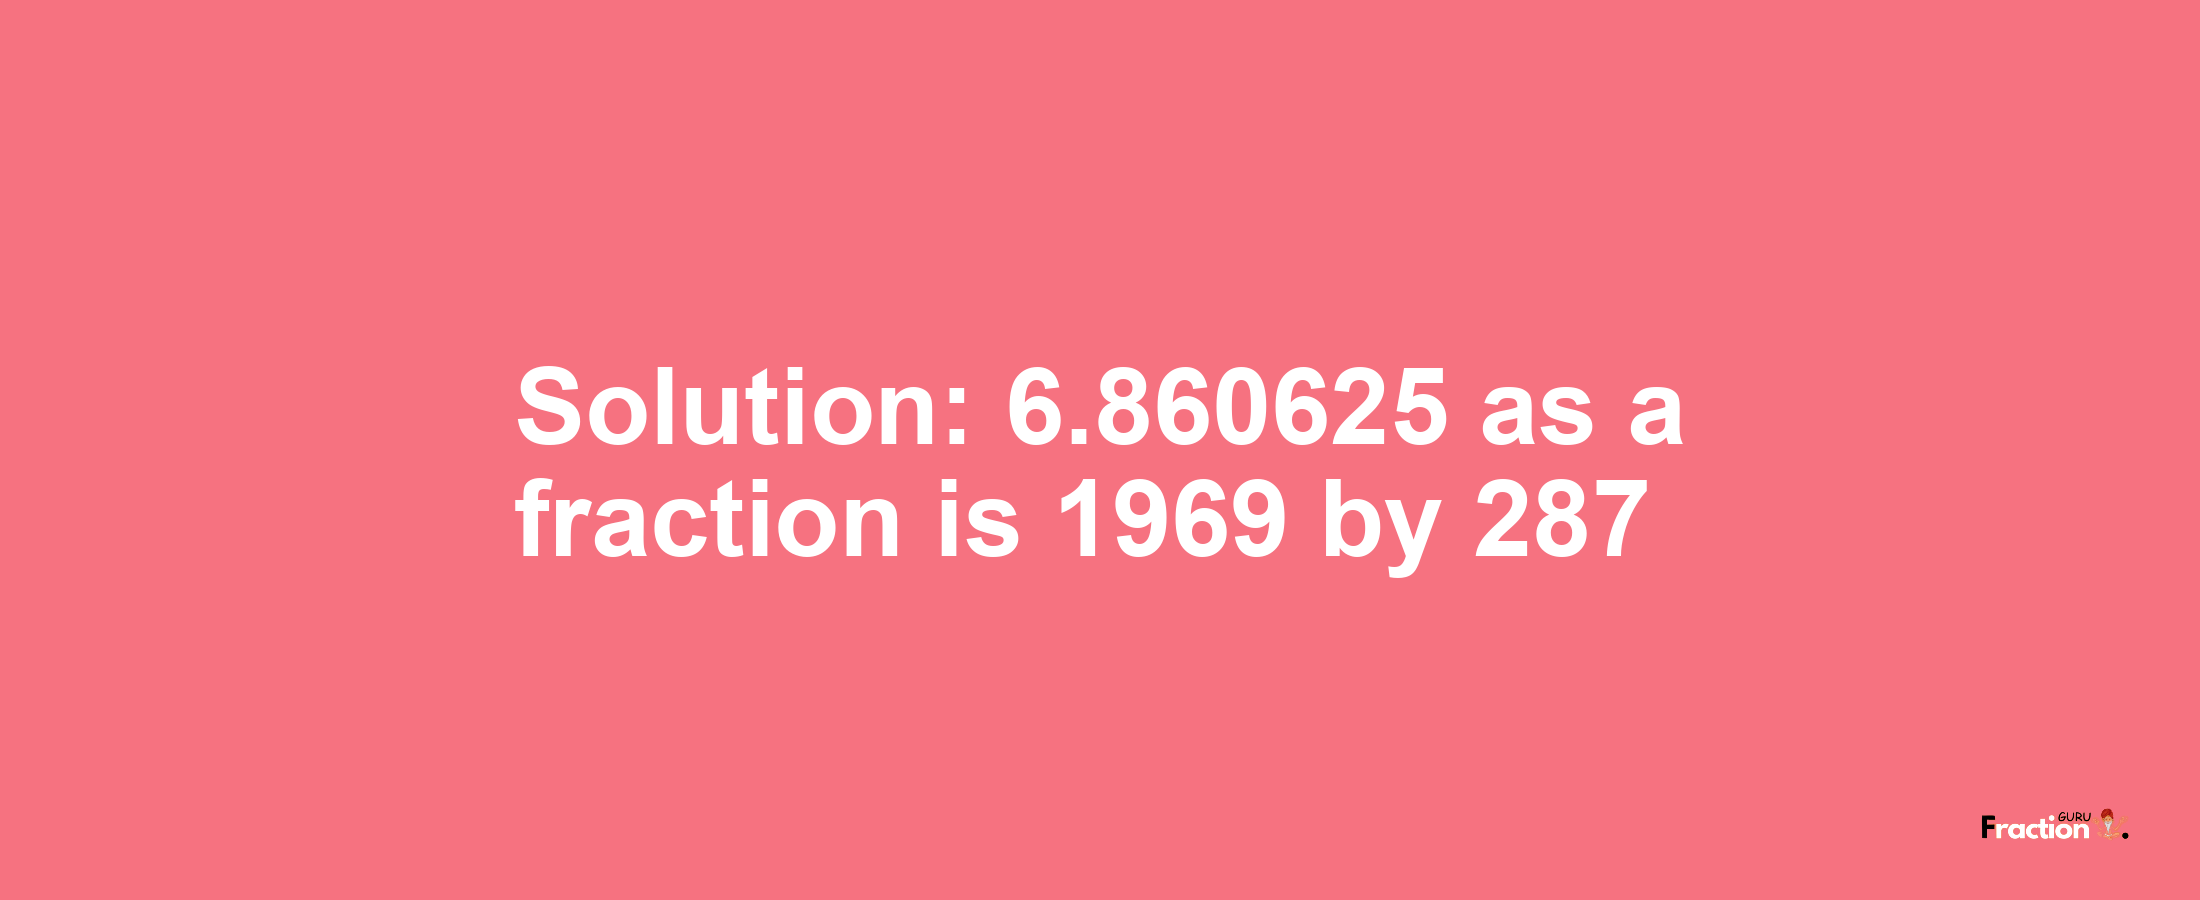 Solution:6.860625 as a fraction is 1969/287